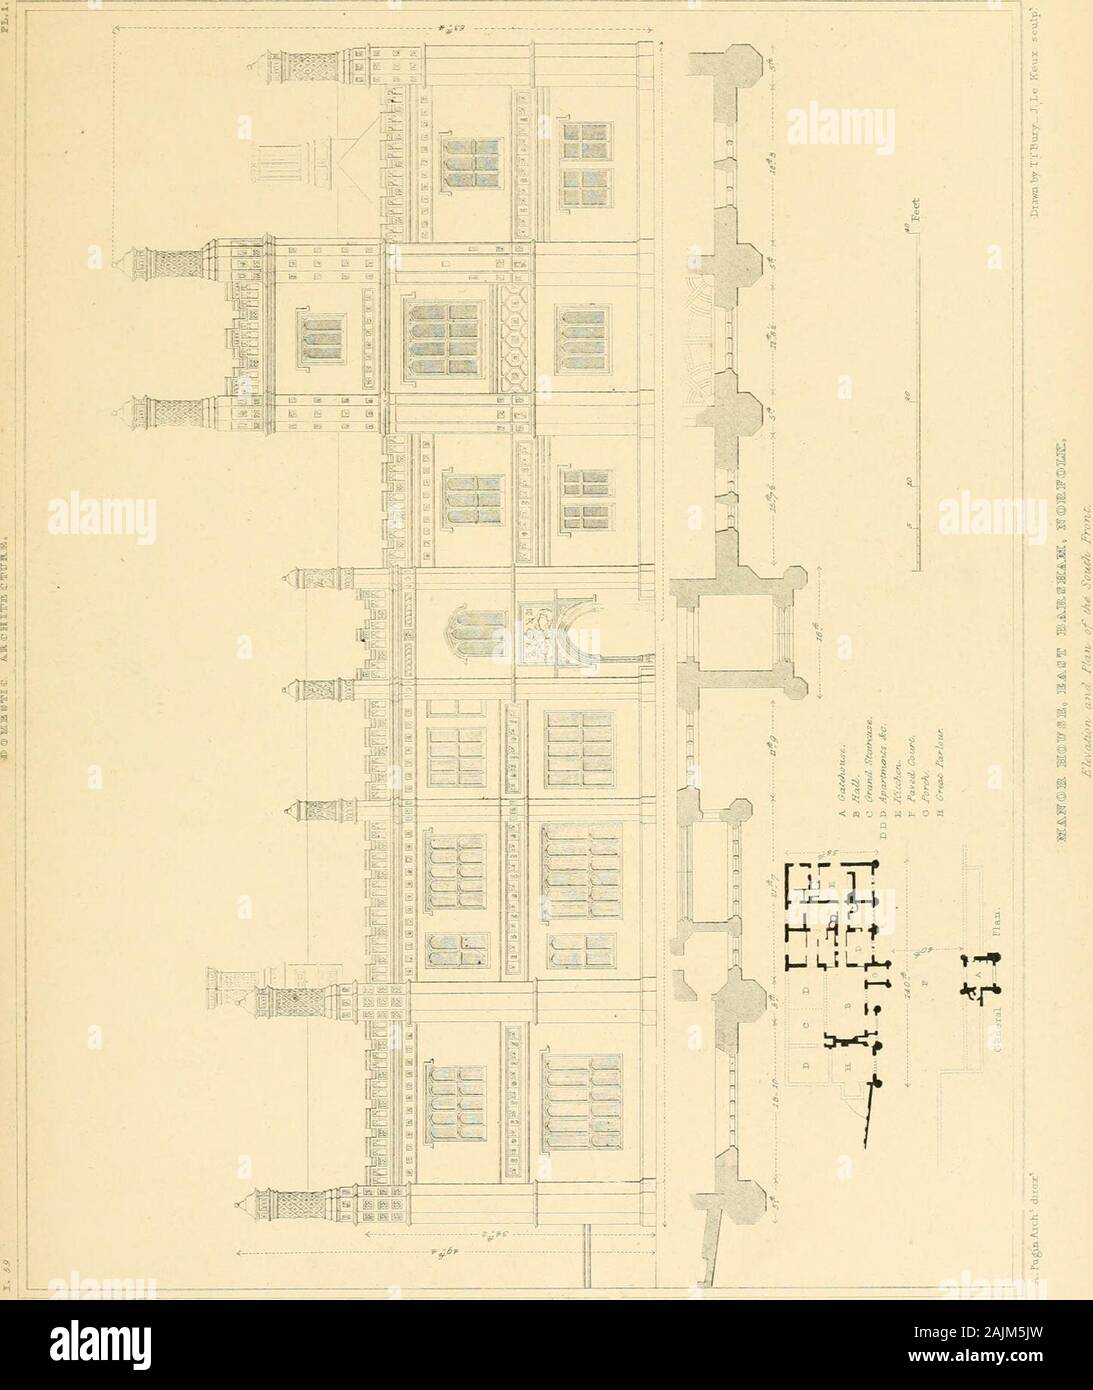 Examples of Gothic architecture : selected from various ancient edifices in England ; consisting of plans, elevations, sections, and parts at large ; calculated to exemplify the various styles and the practical construction of this admired class of architecture ; accompanied by historical and descriptive accounts . Window above tiie (.TAteway-.;;^ - Half aia Inch, to a IFoot. AJVigiiL.ArclL* dicer? Dra-wniVy E.Arundale ^.Gladwin, scvlp*- Details of SnirzuicE. Gtztewav. -NbrtJi- Fwrit.. ZD S::^!:^ s rxc .ija.csxz?^ c ttth.iEo- Stock Photo